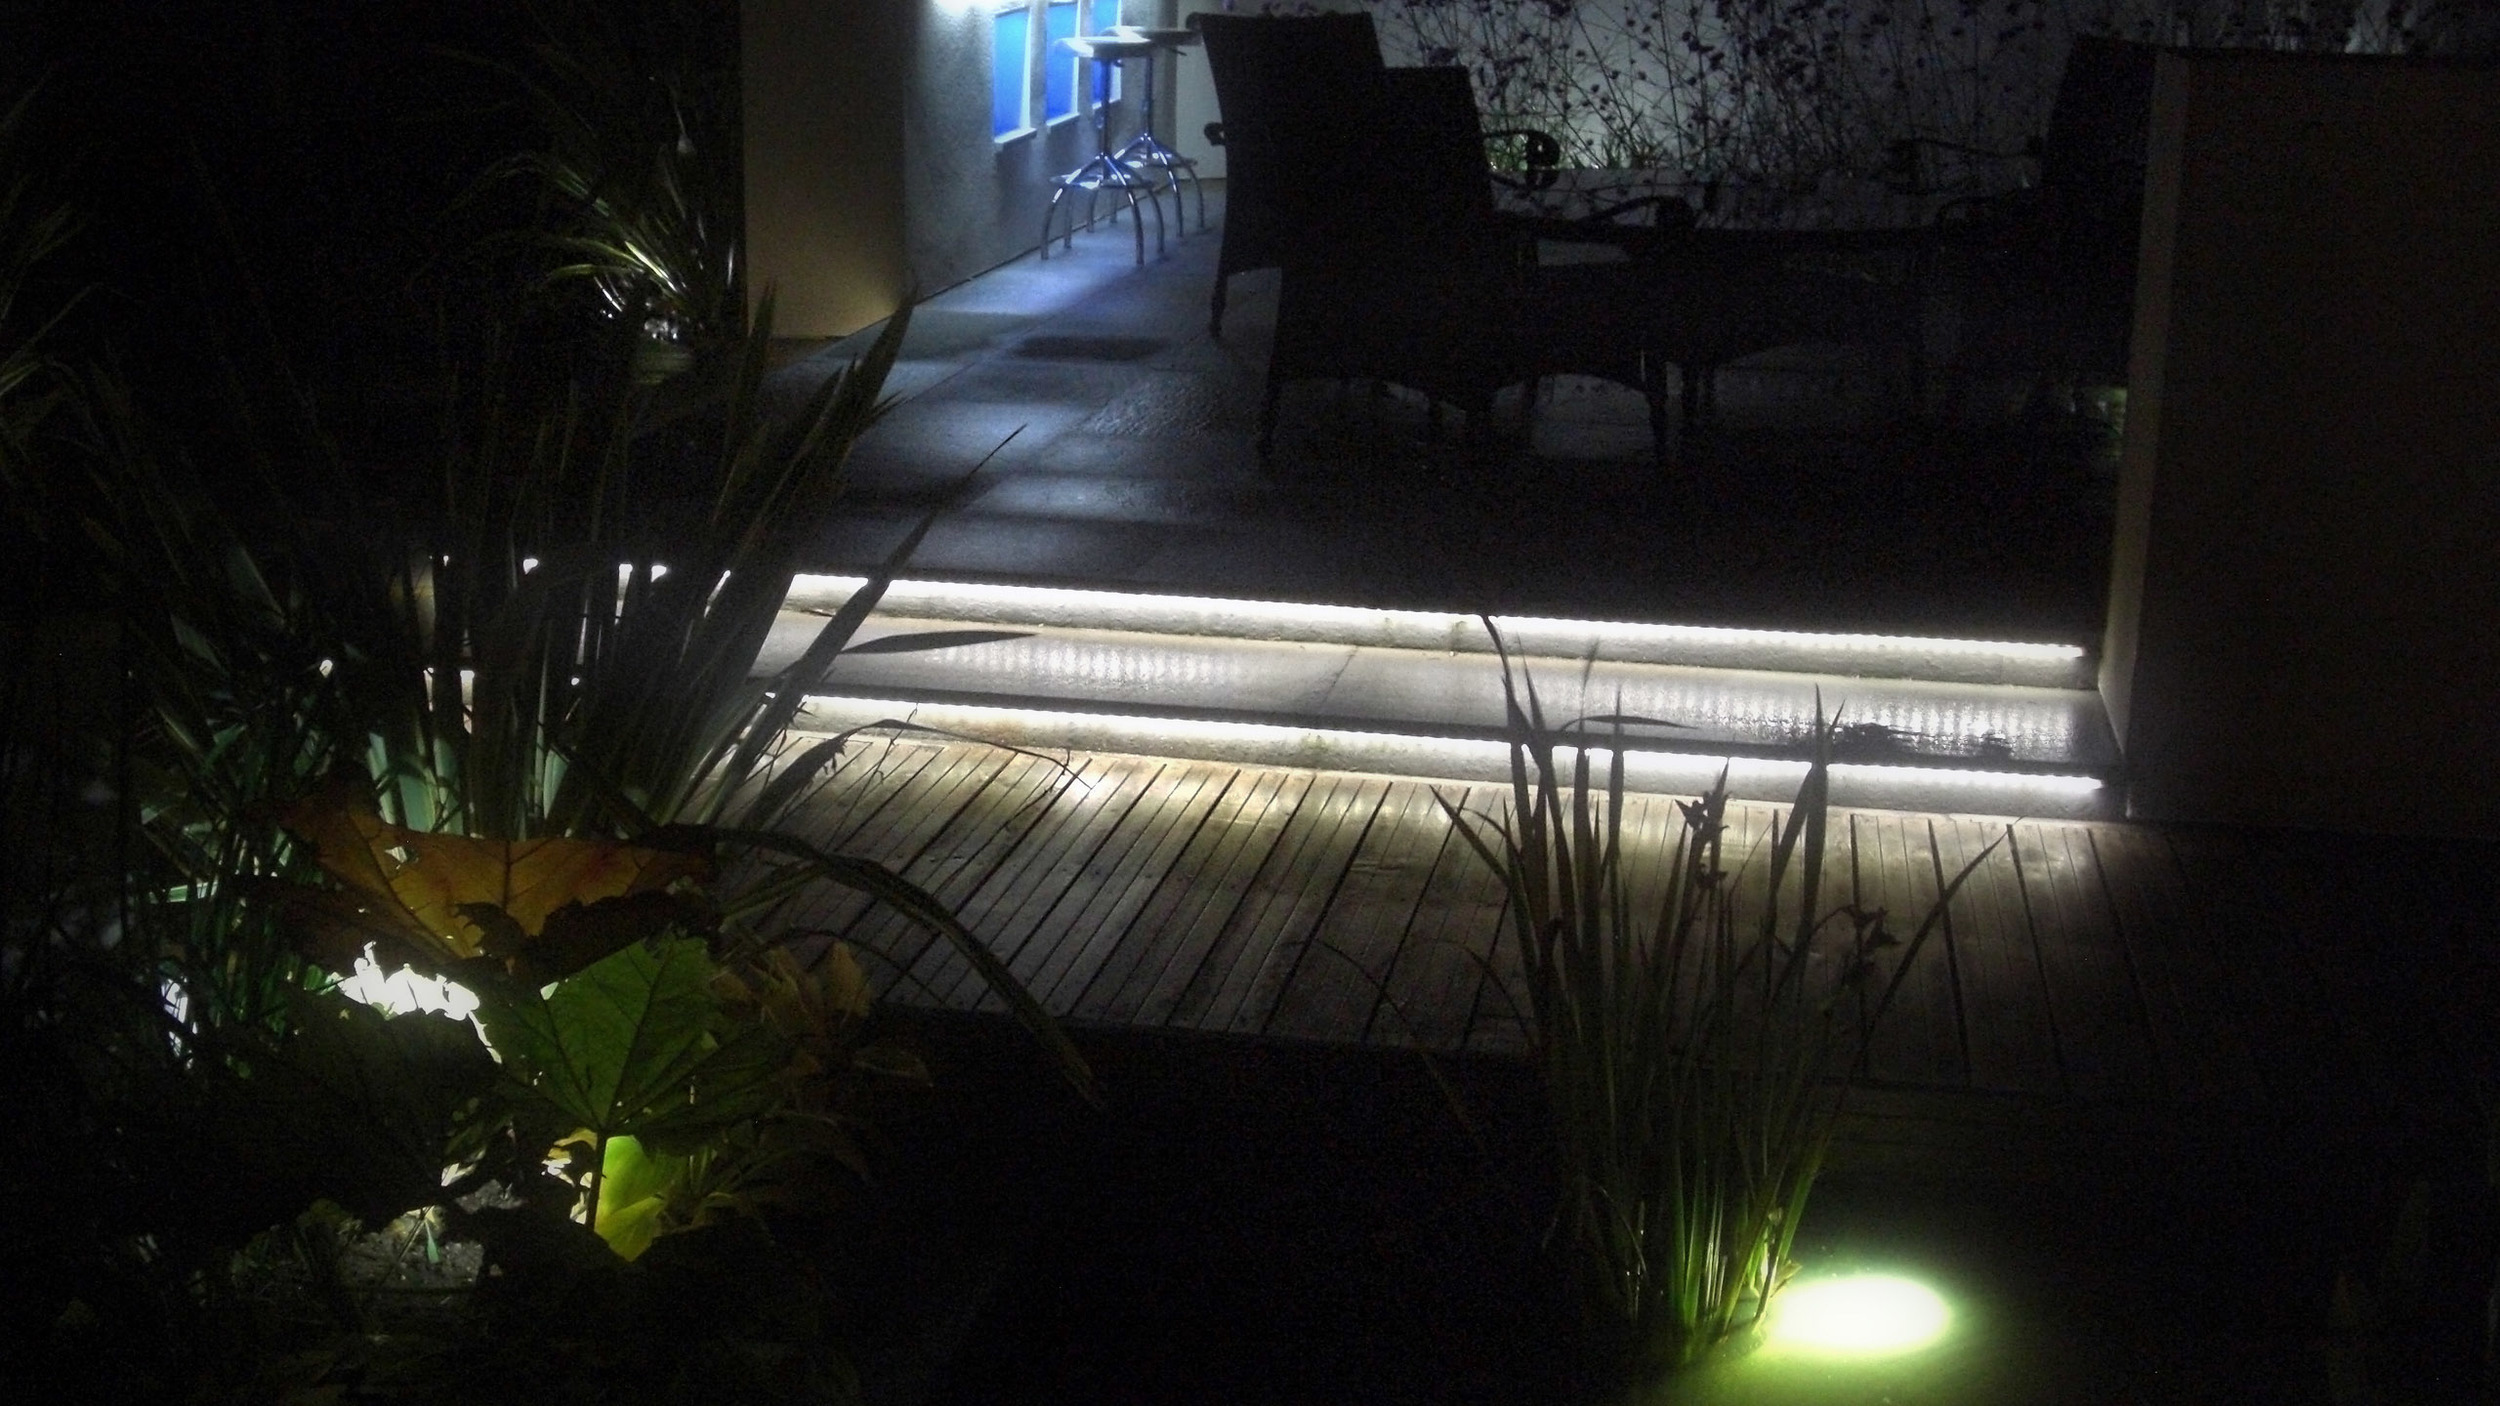 Contemporary garden by night with bar and dining area